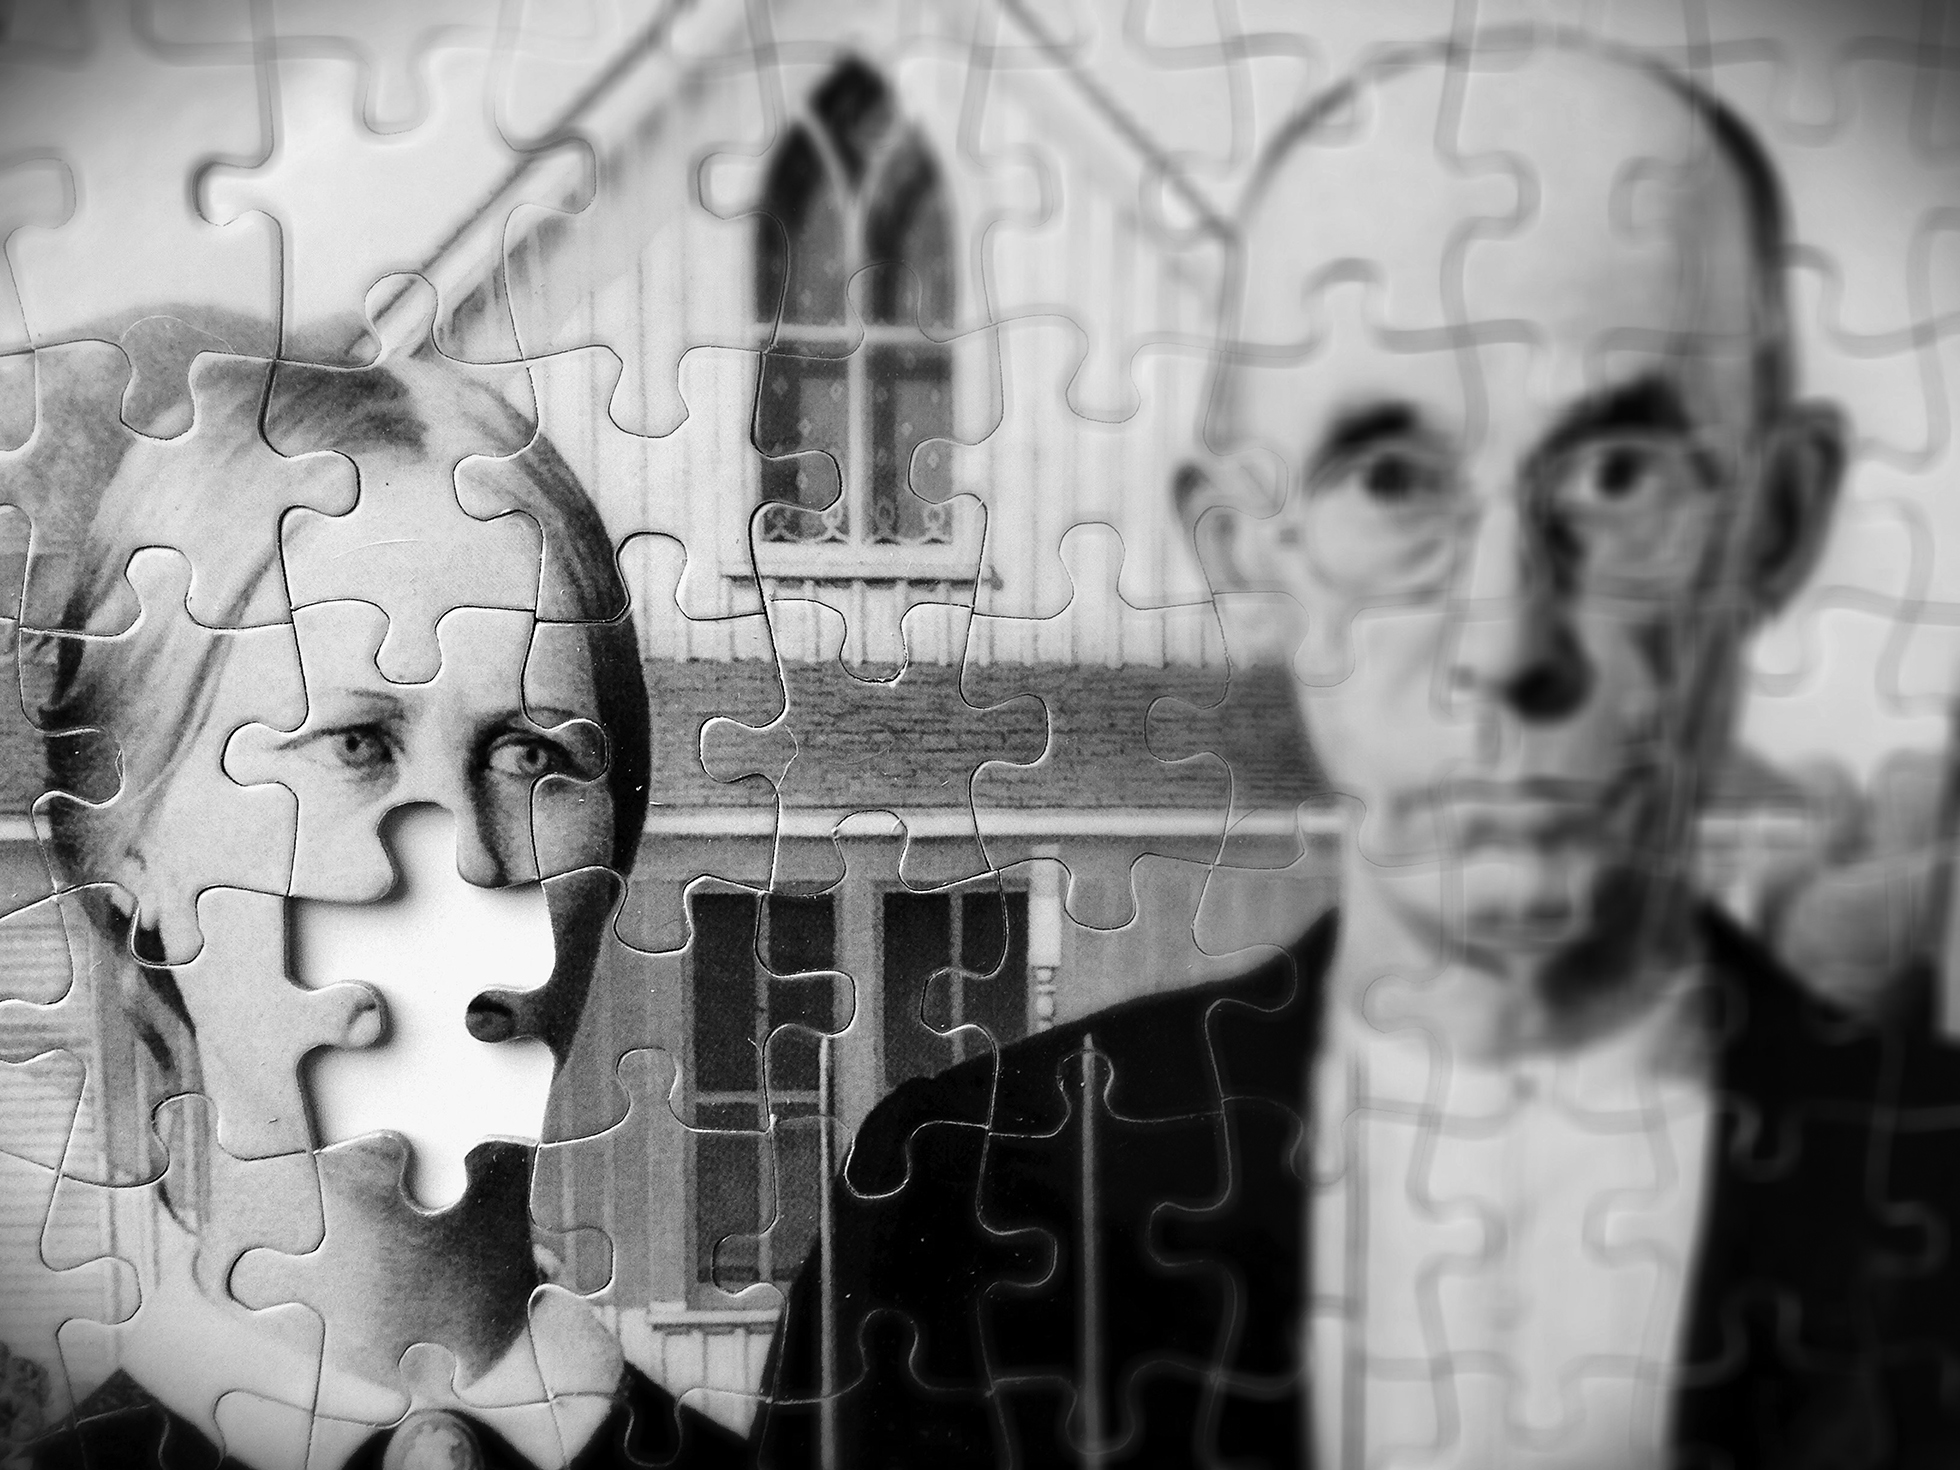 Top portion of Grant Wood’s American Gothic painting with a puzzle effect applied. The puzzle piece where the woman’s mouth should be is missing and shows white underneath.